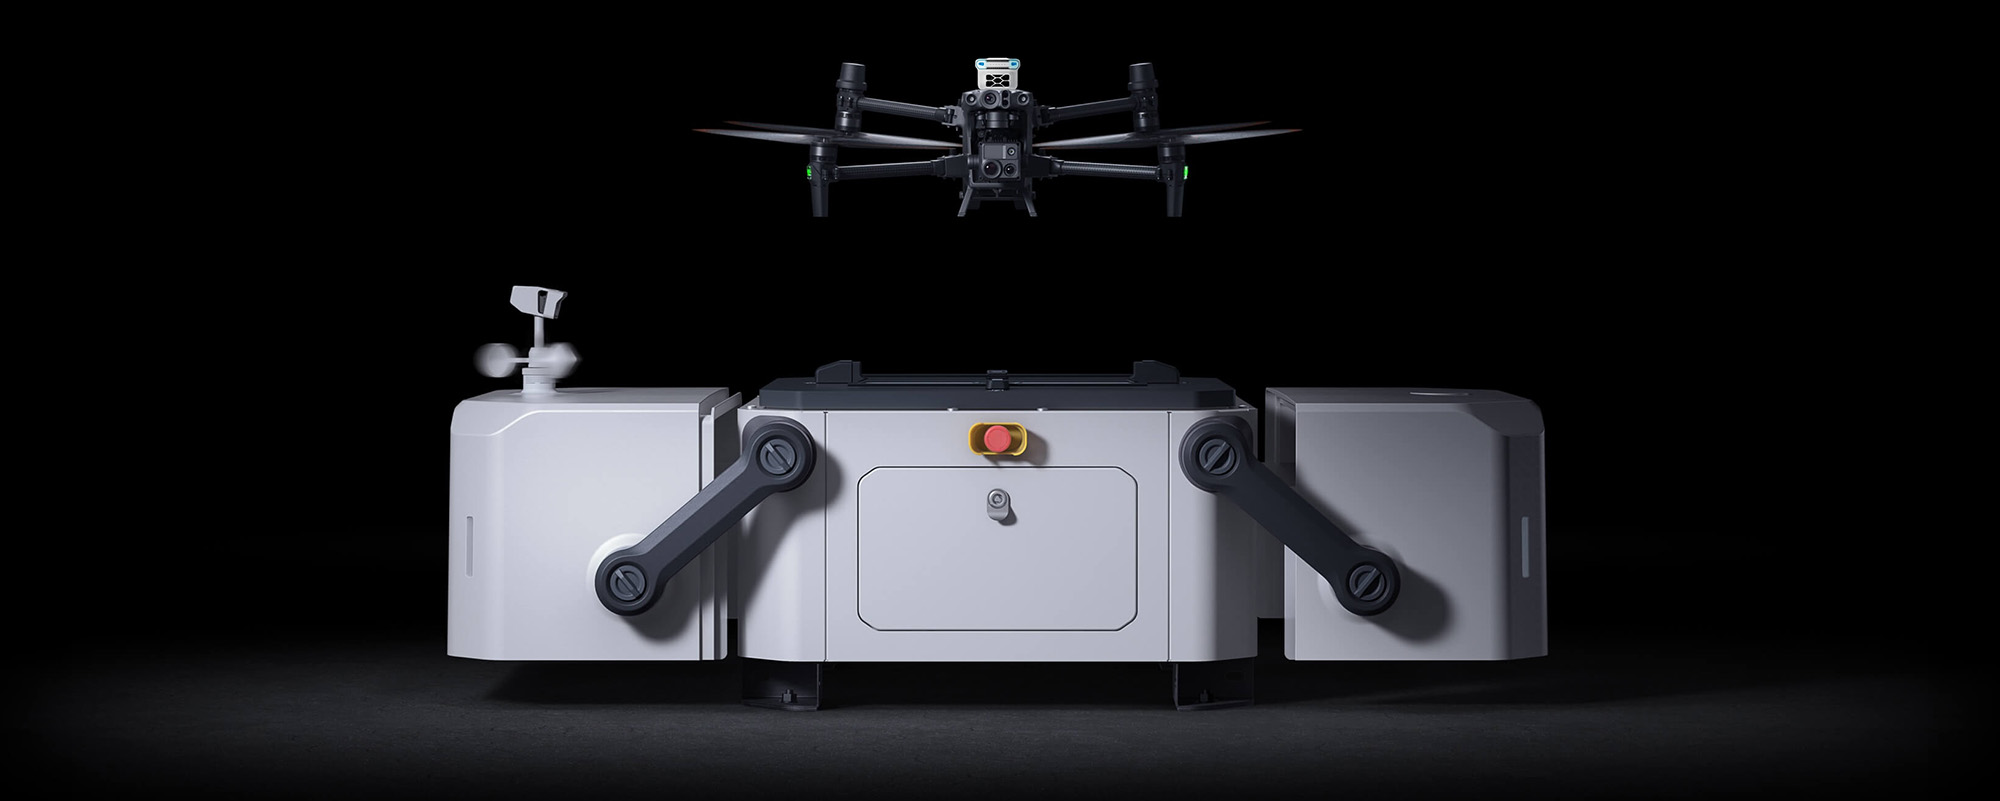 Sniffer4D by DJI - Enterprise Drones for Sale - TurnTech Solutions - Langley, BC, Canada